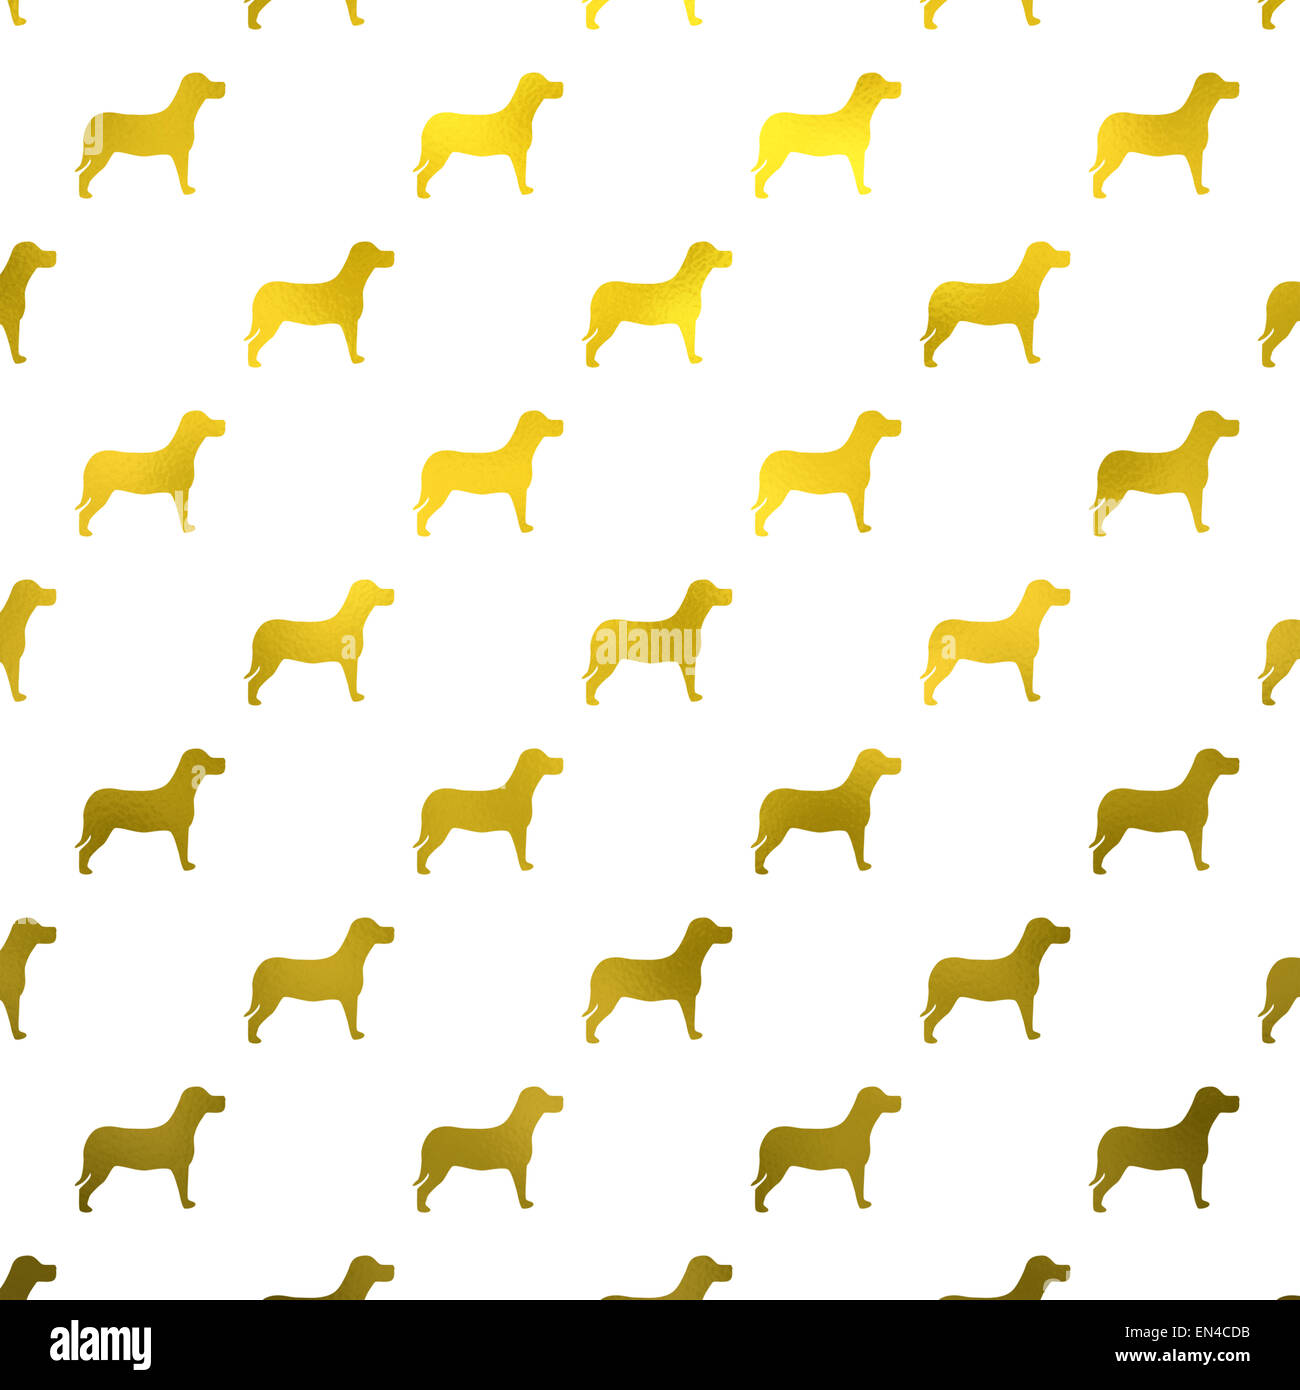 Gold and White Dogs Faux Foil Metallic Dog Polka Dots Background Pattern Texture Stock Photo